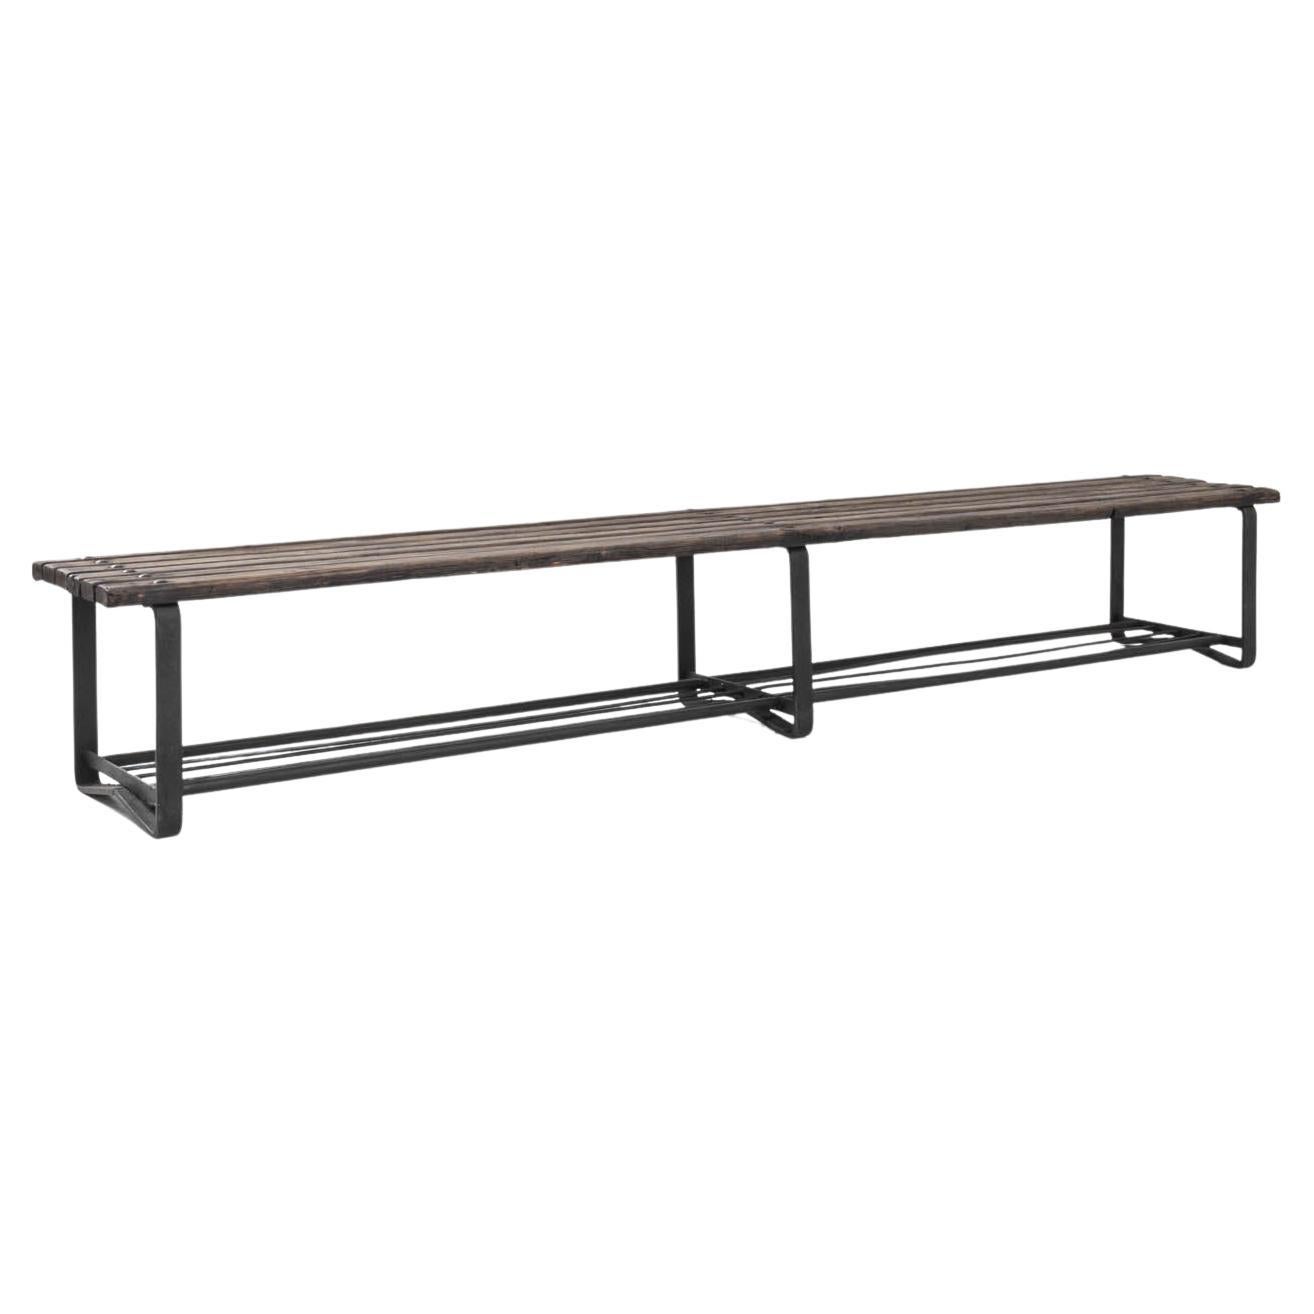 1950s Central European Industrial Steel Frame Bench For Sale